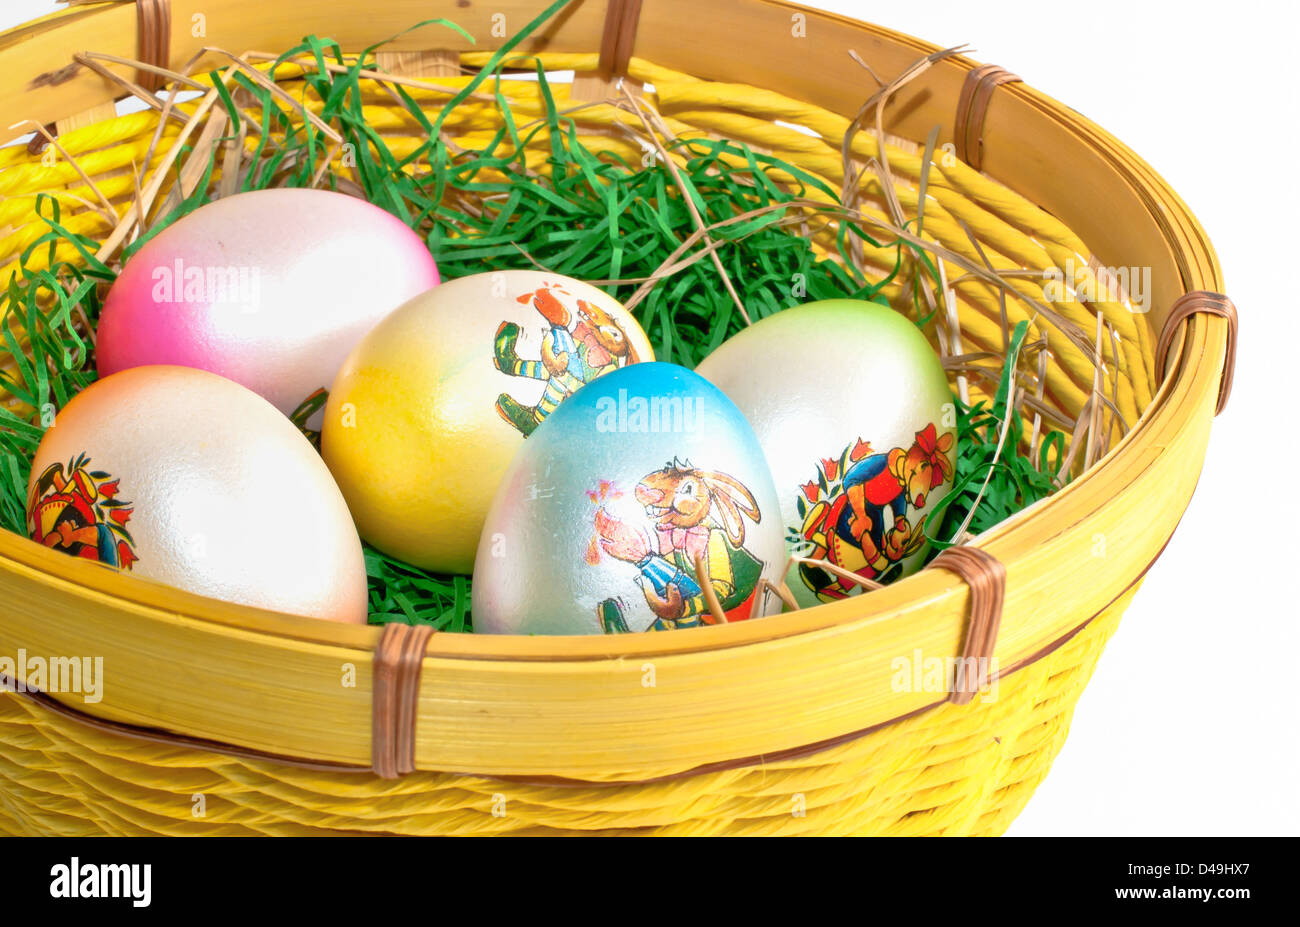 easter, decoration, yellow, basket, fun, red, seasonal, concept, festive, celebration, graphic, event, traditional, colored, Stock Photo